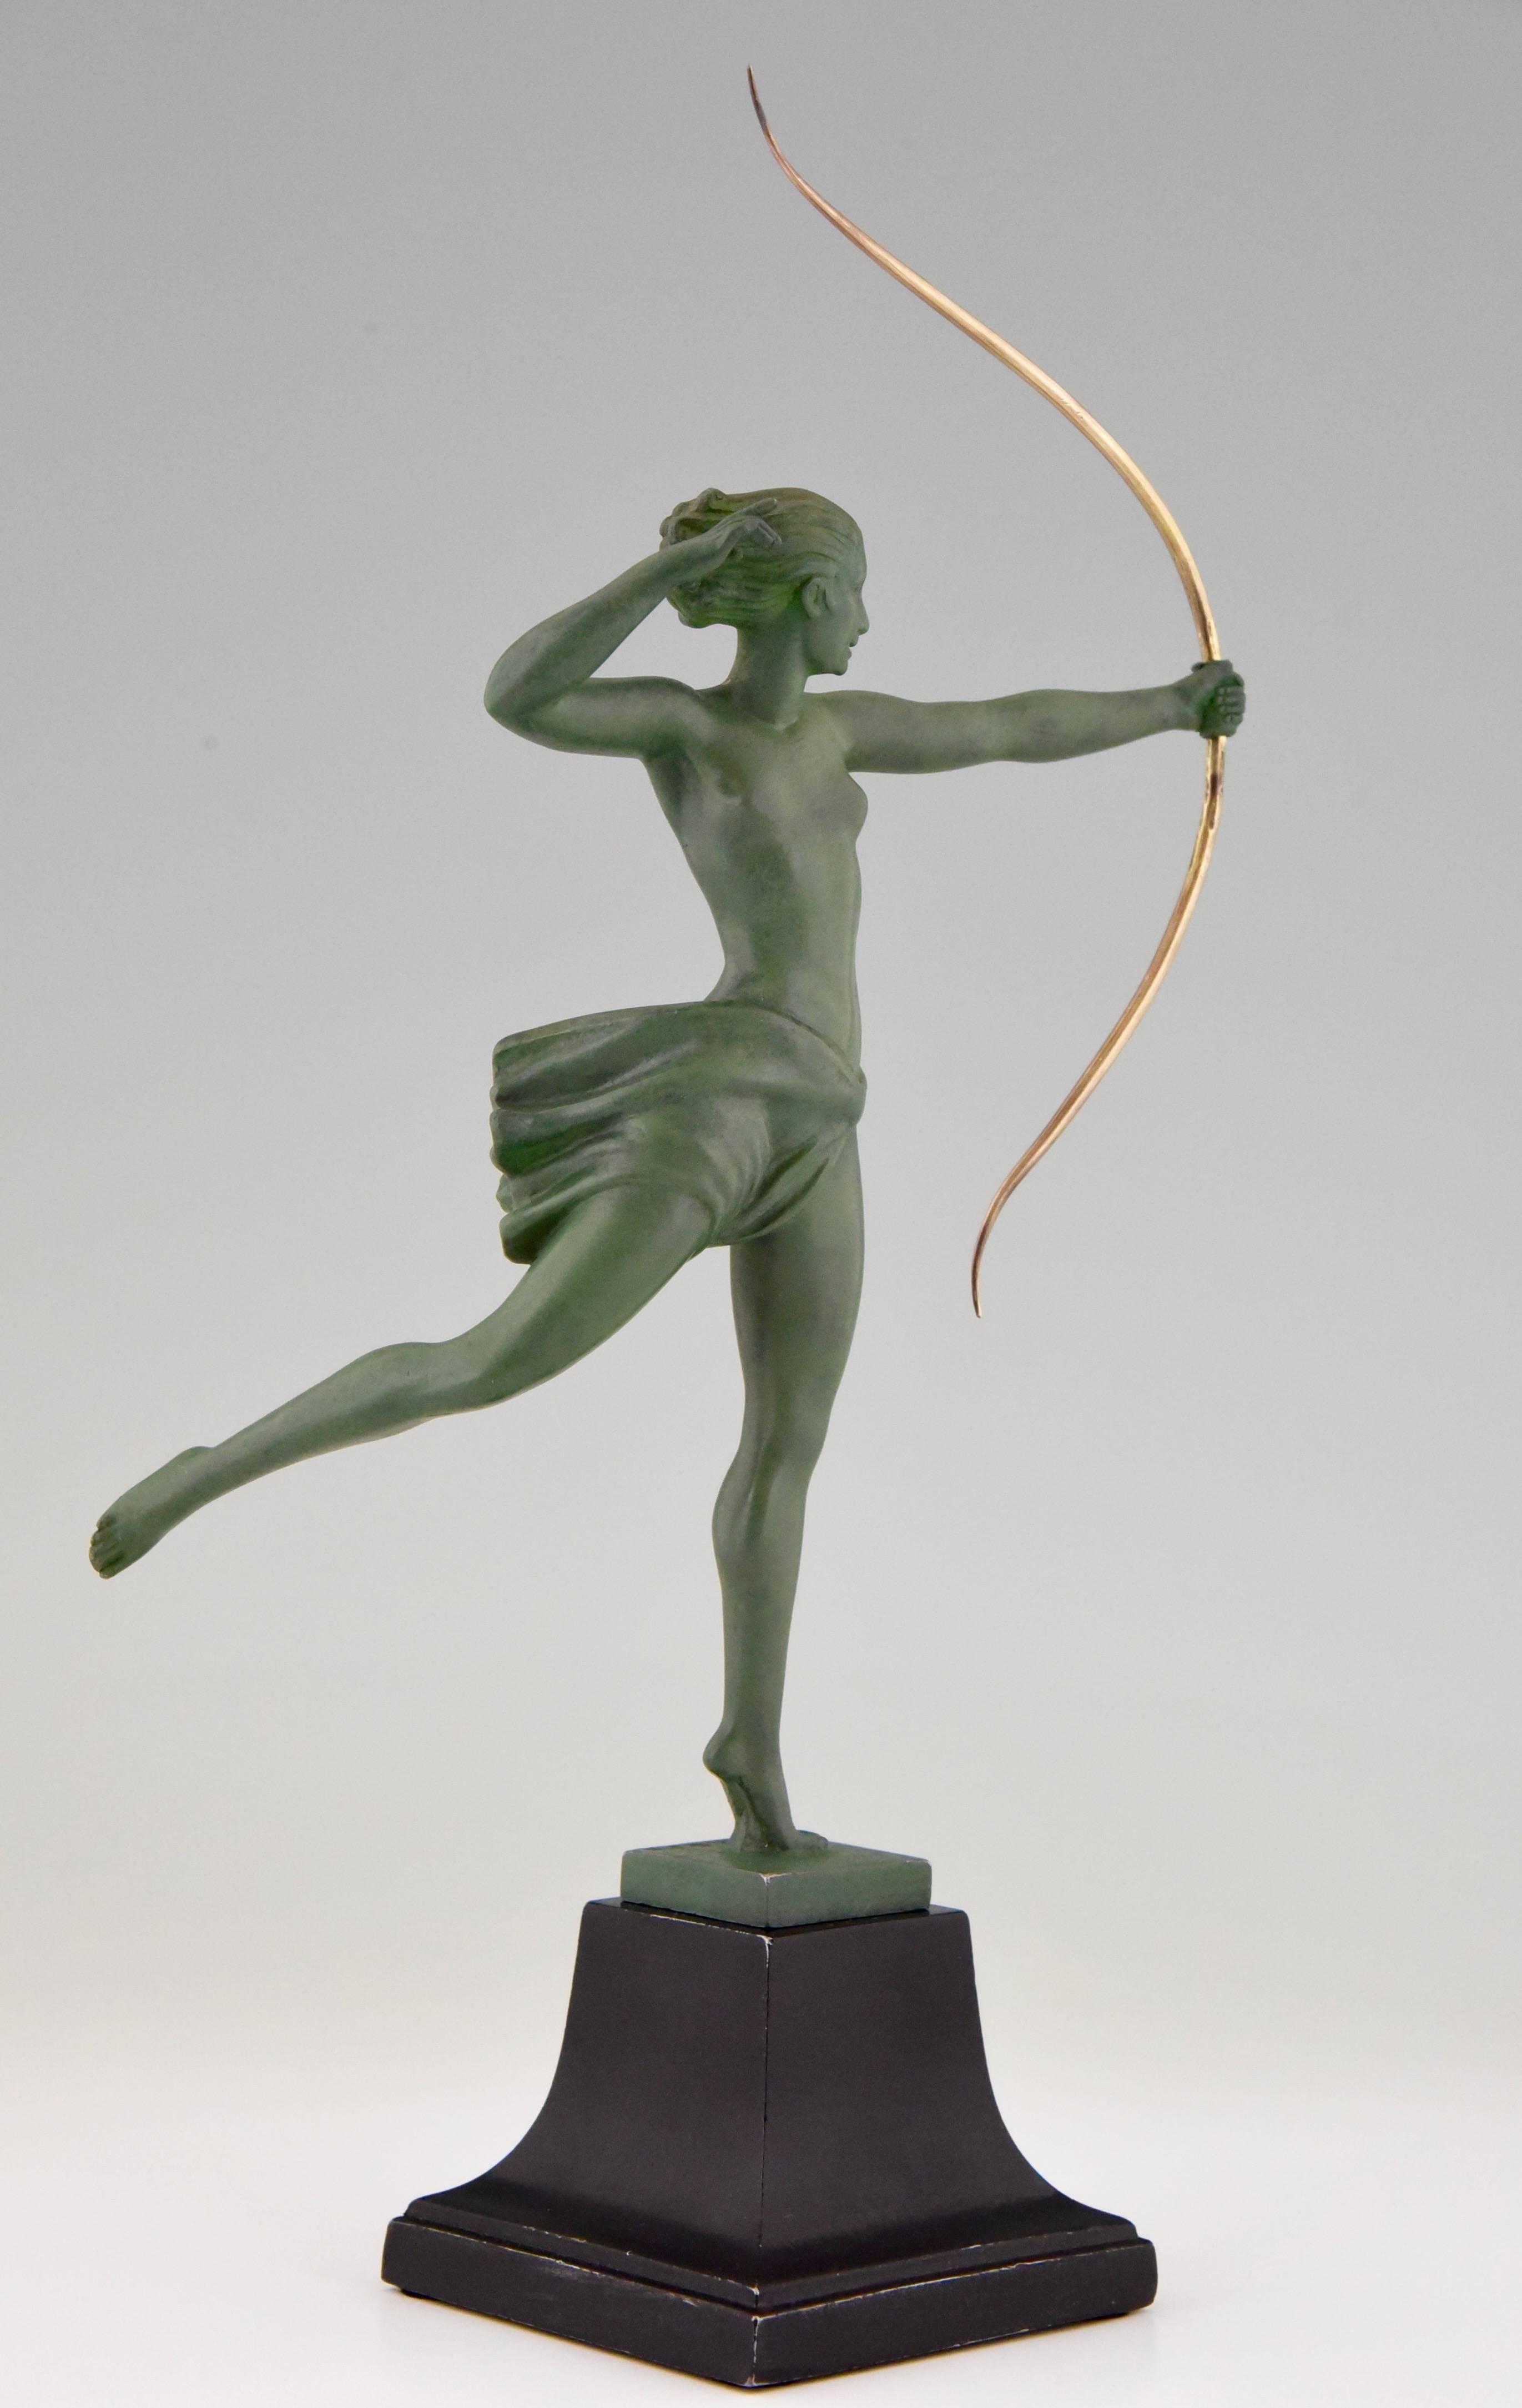 Diana, Art Deco nude with bow. 
Artist/ Maker: Jean de Marco.
Signature/ Marks:  Demarc.  Cast by the Max Le Verrier foundry. 
Style:  Art Deco.
Condition:  Good original condition, see pictures. 
Date: circa 1935.
Material: Metal with green